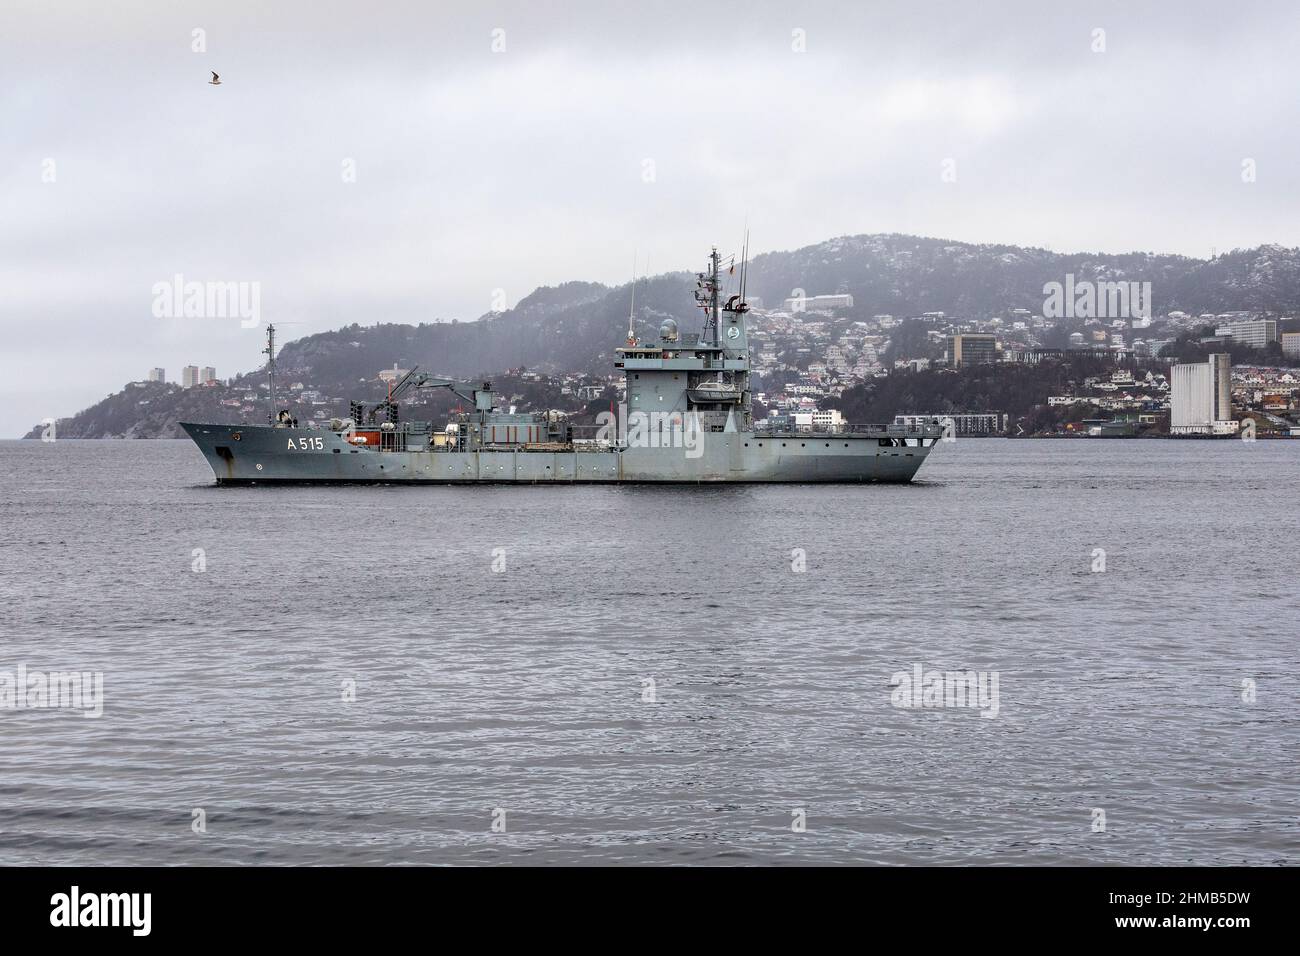 German navy replenishment and support vessel Main A515 departing from port of Bergen, Norway.  A dark, rainy and foggy winter day Stock Photo